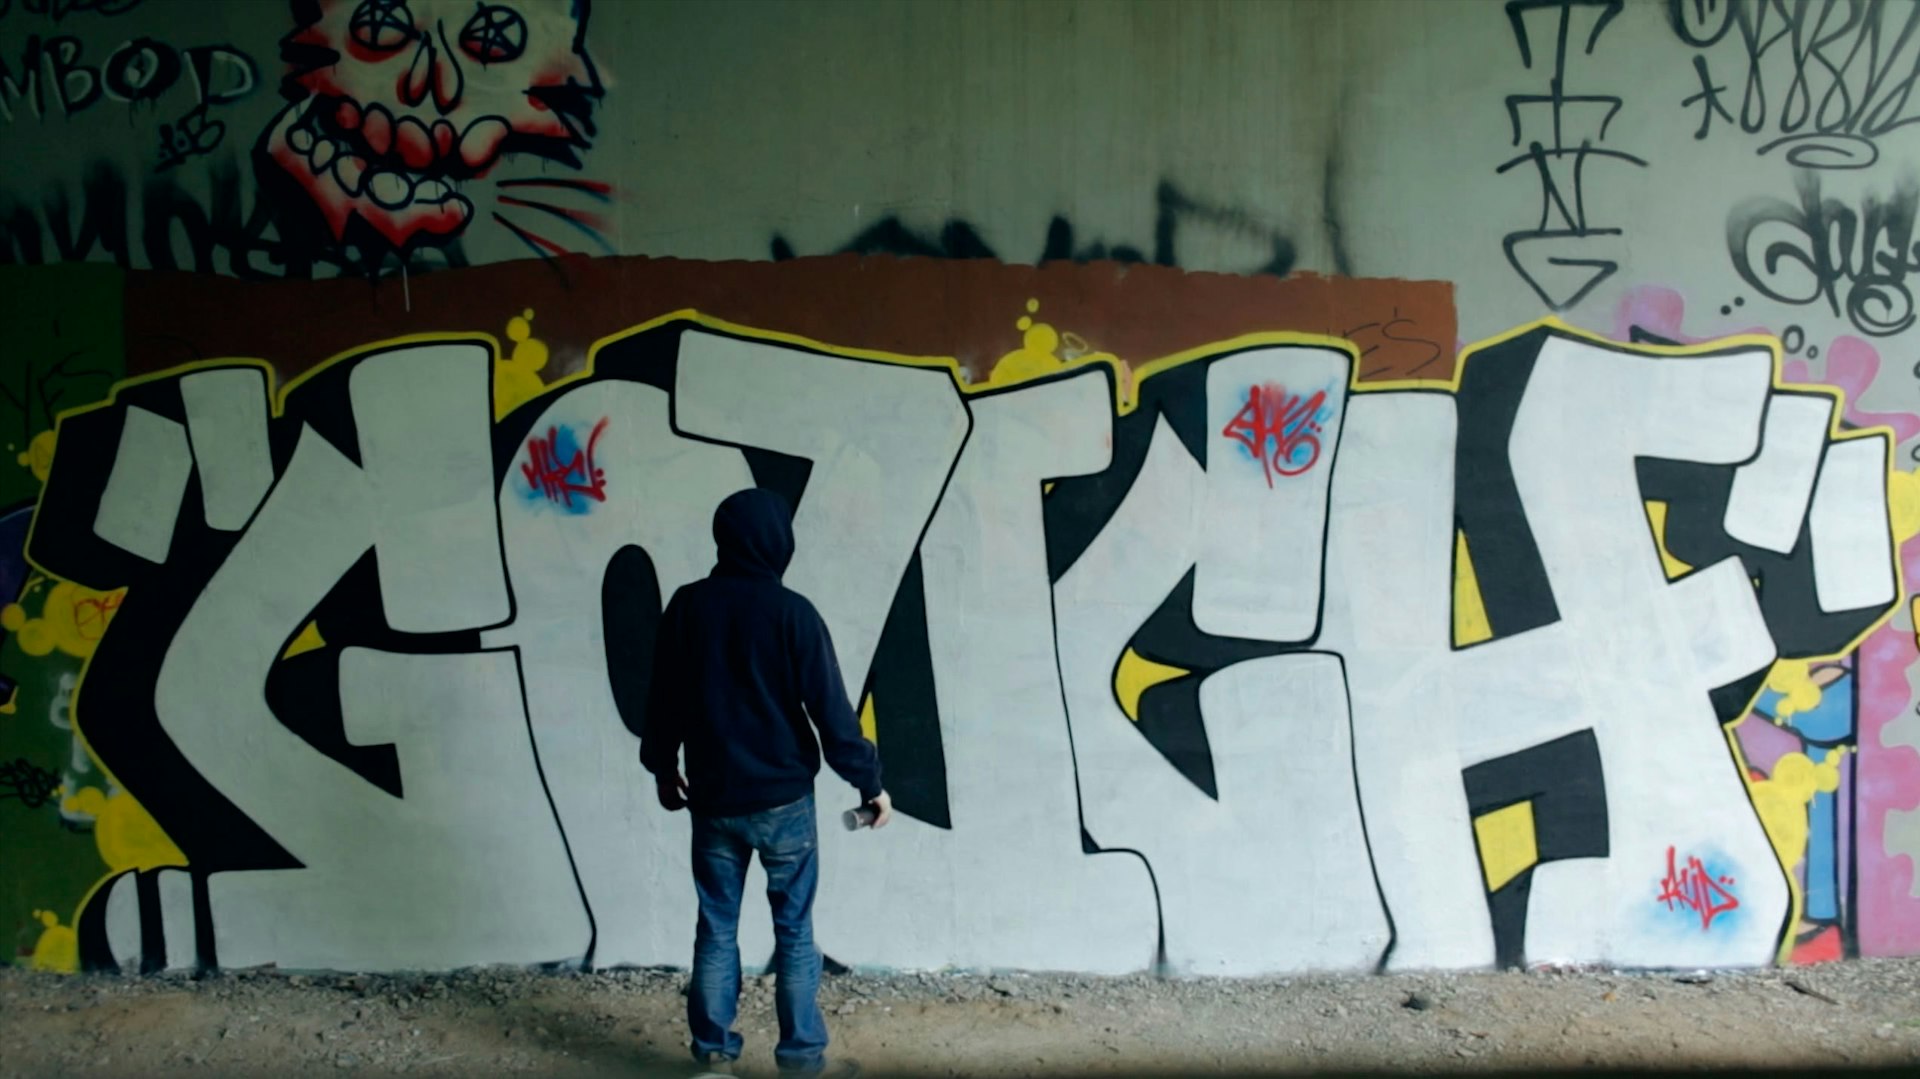 NYC legend Gouch on chasing immortality through graffiti